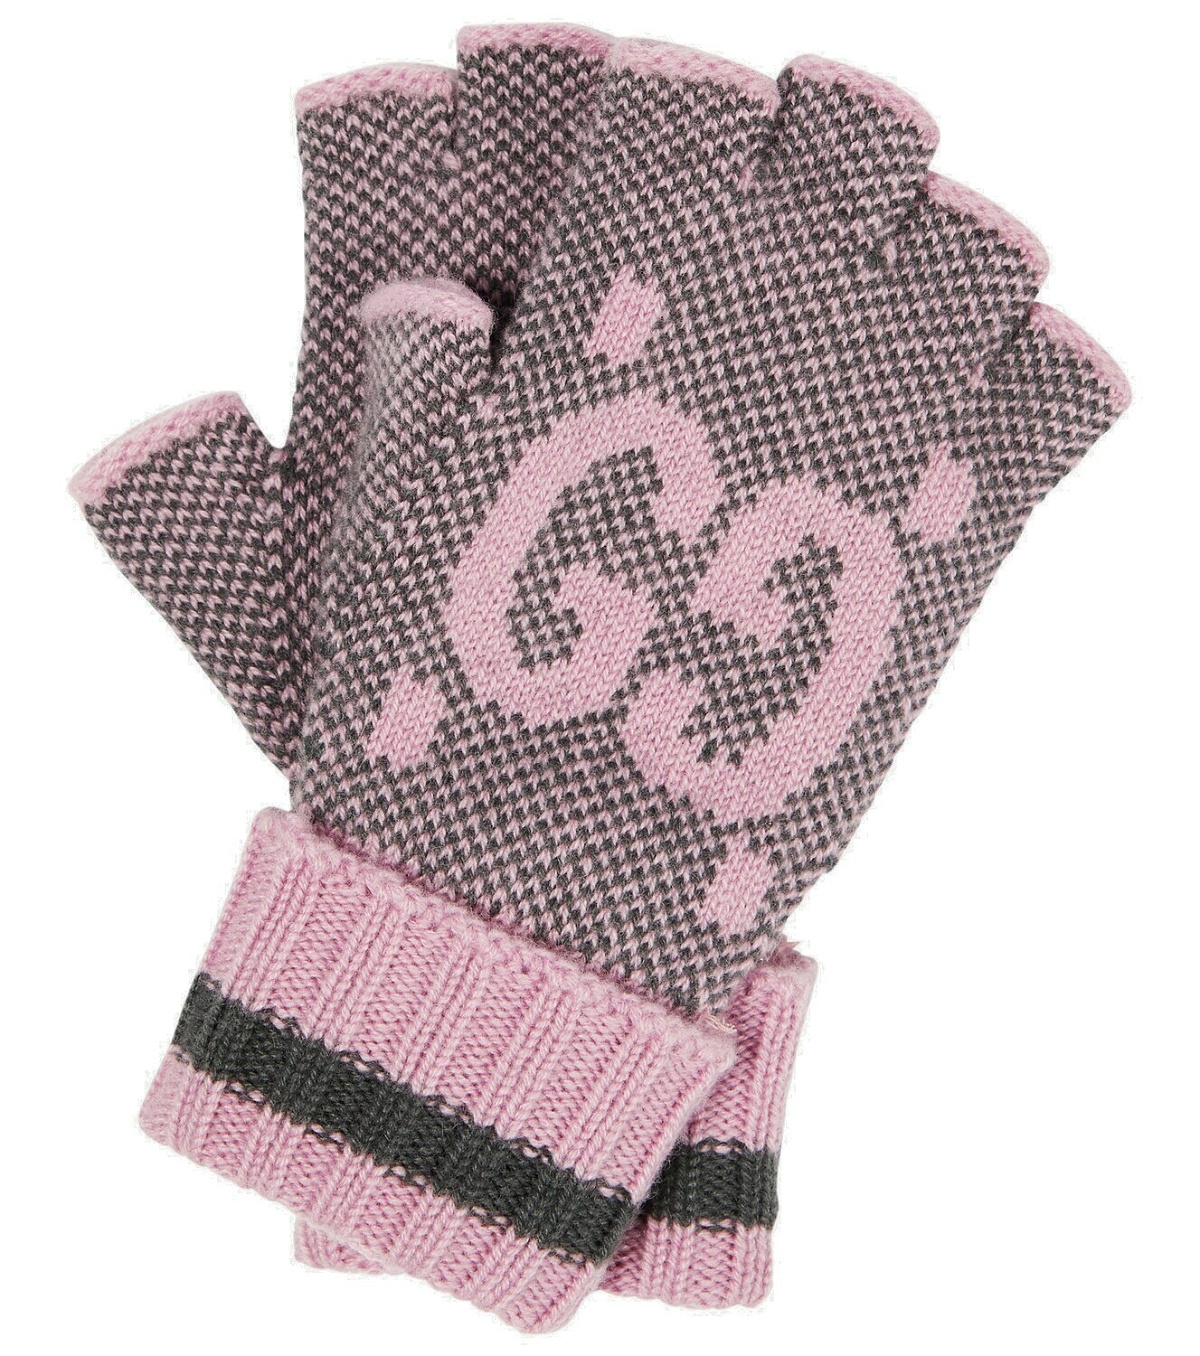 Gucci, Accessories, Gucci Gg Logo Embroidered Black Tulle Gloves